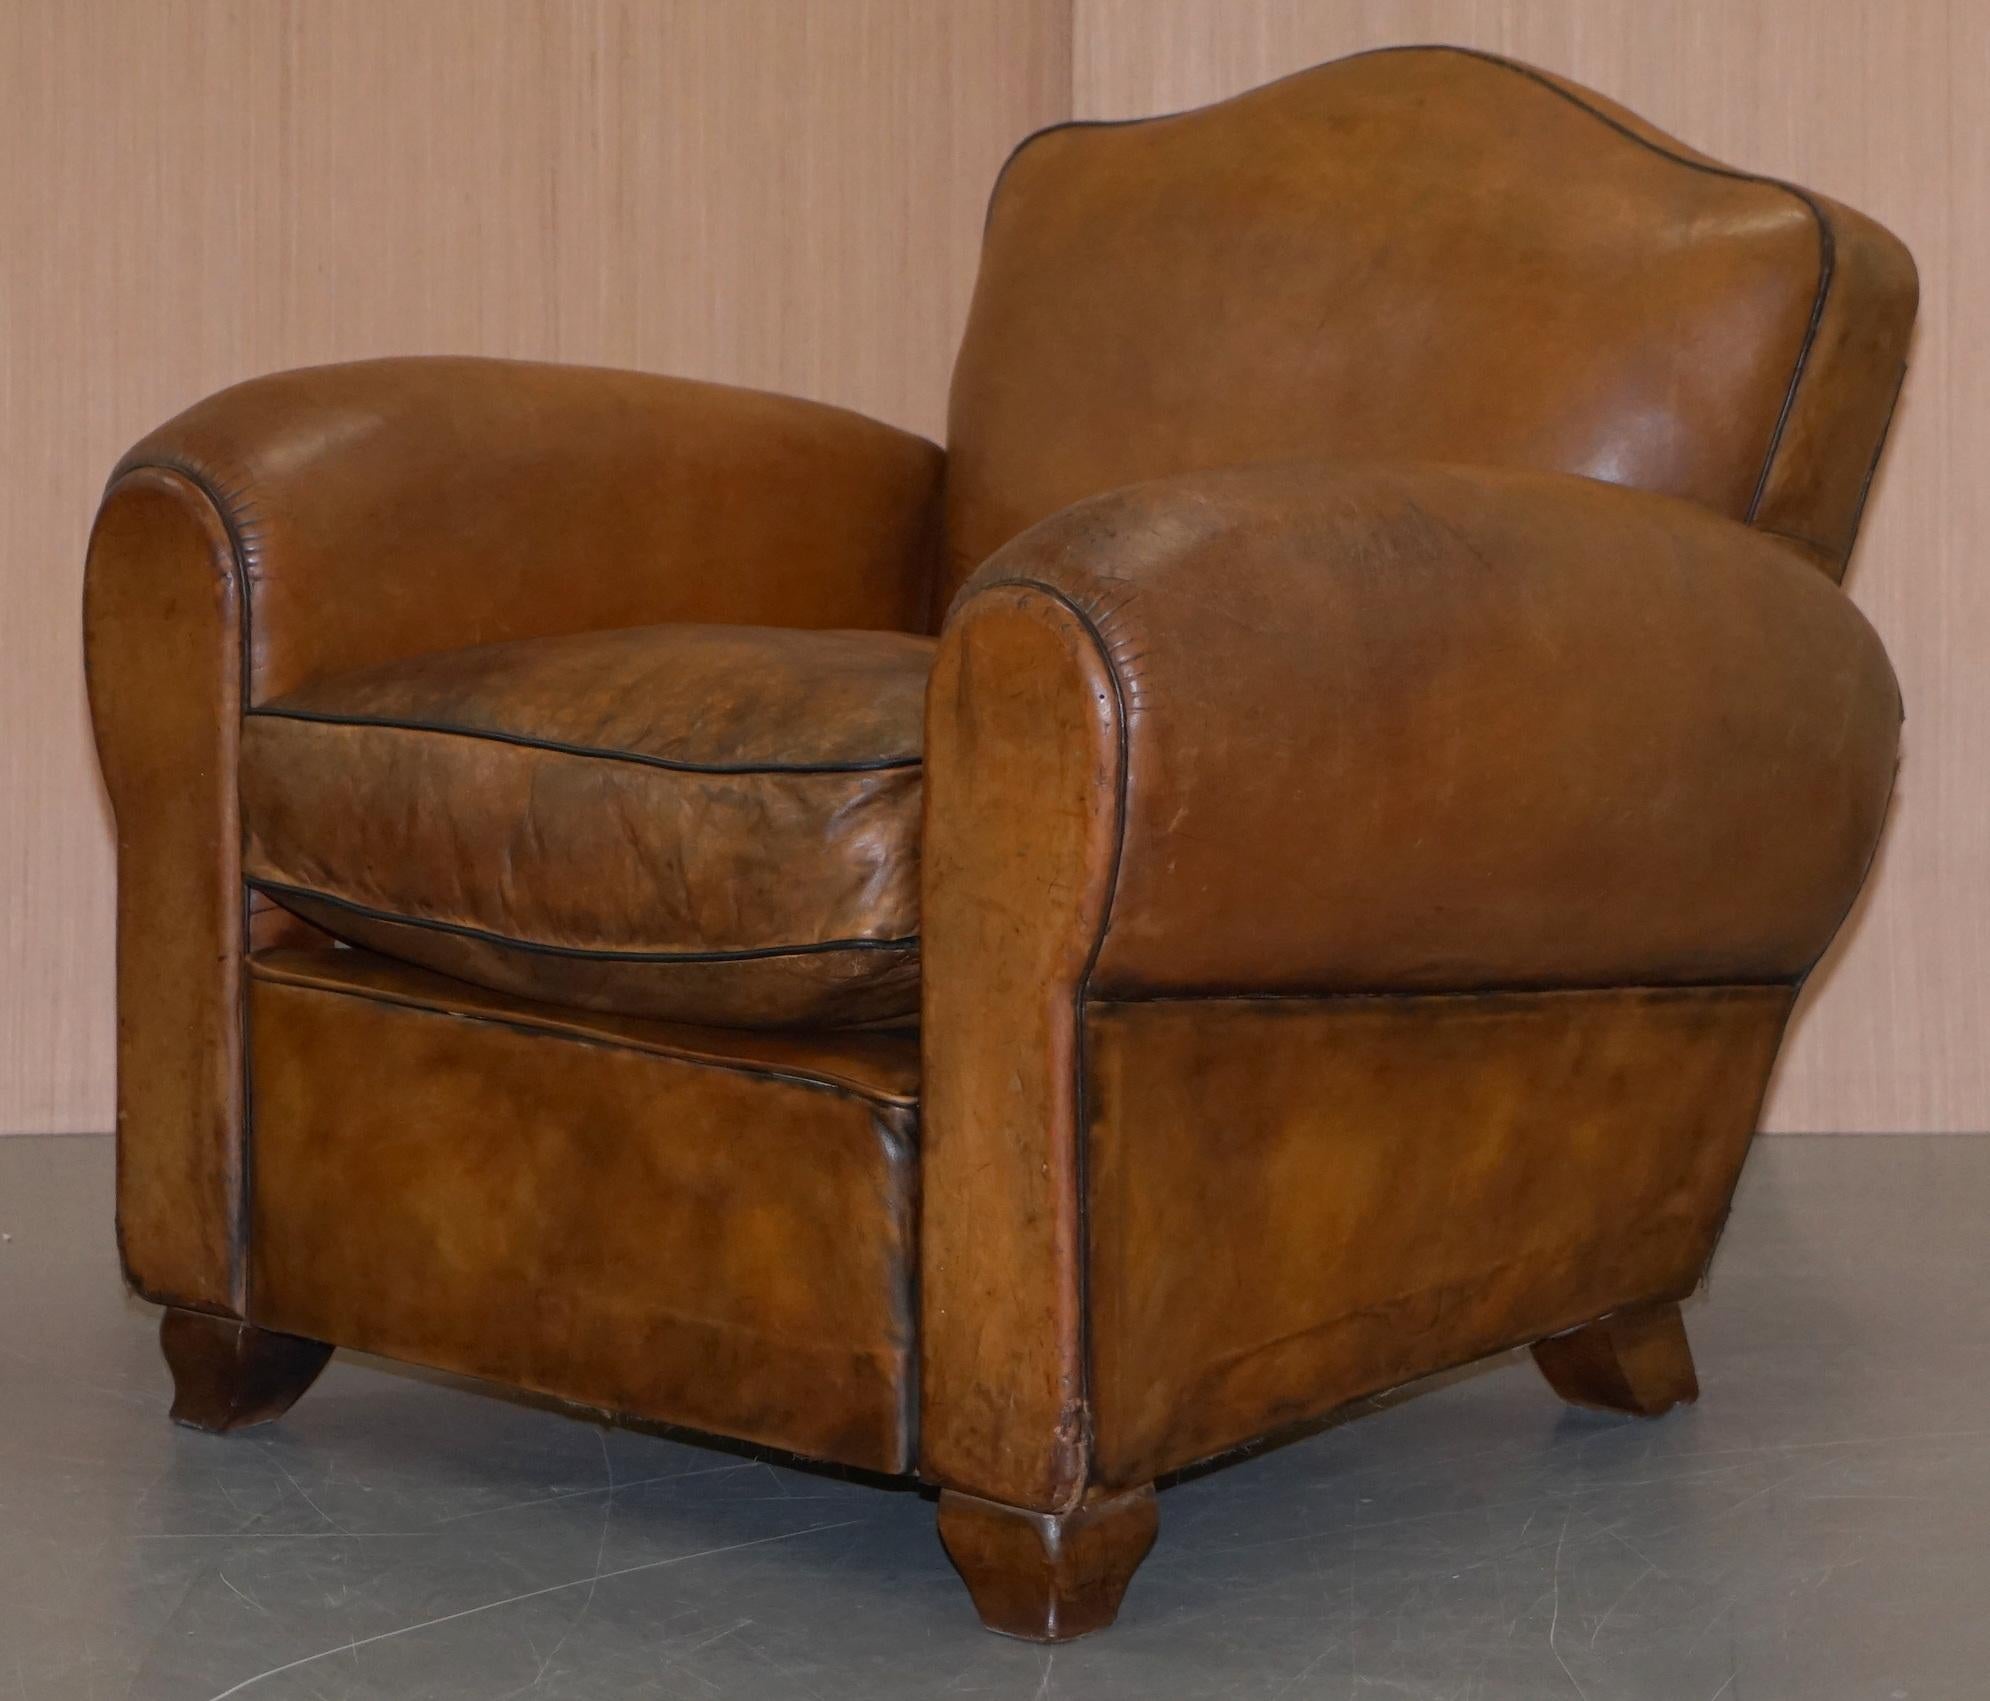 Hand-Crafted Rare Original Pair of French circa 1890 Brown Leather Club Armchairs Hand Dyed